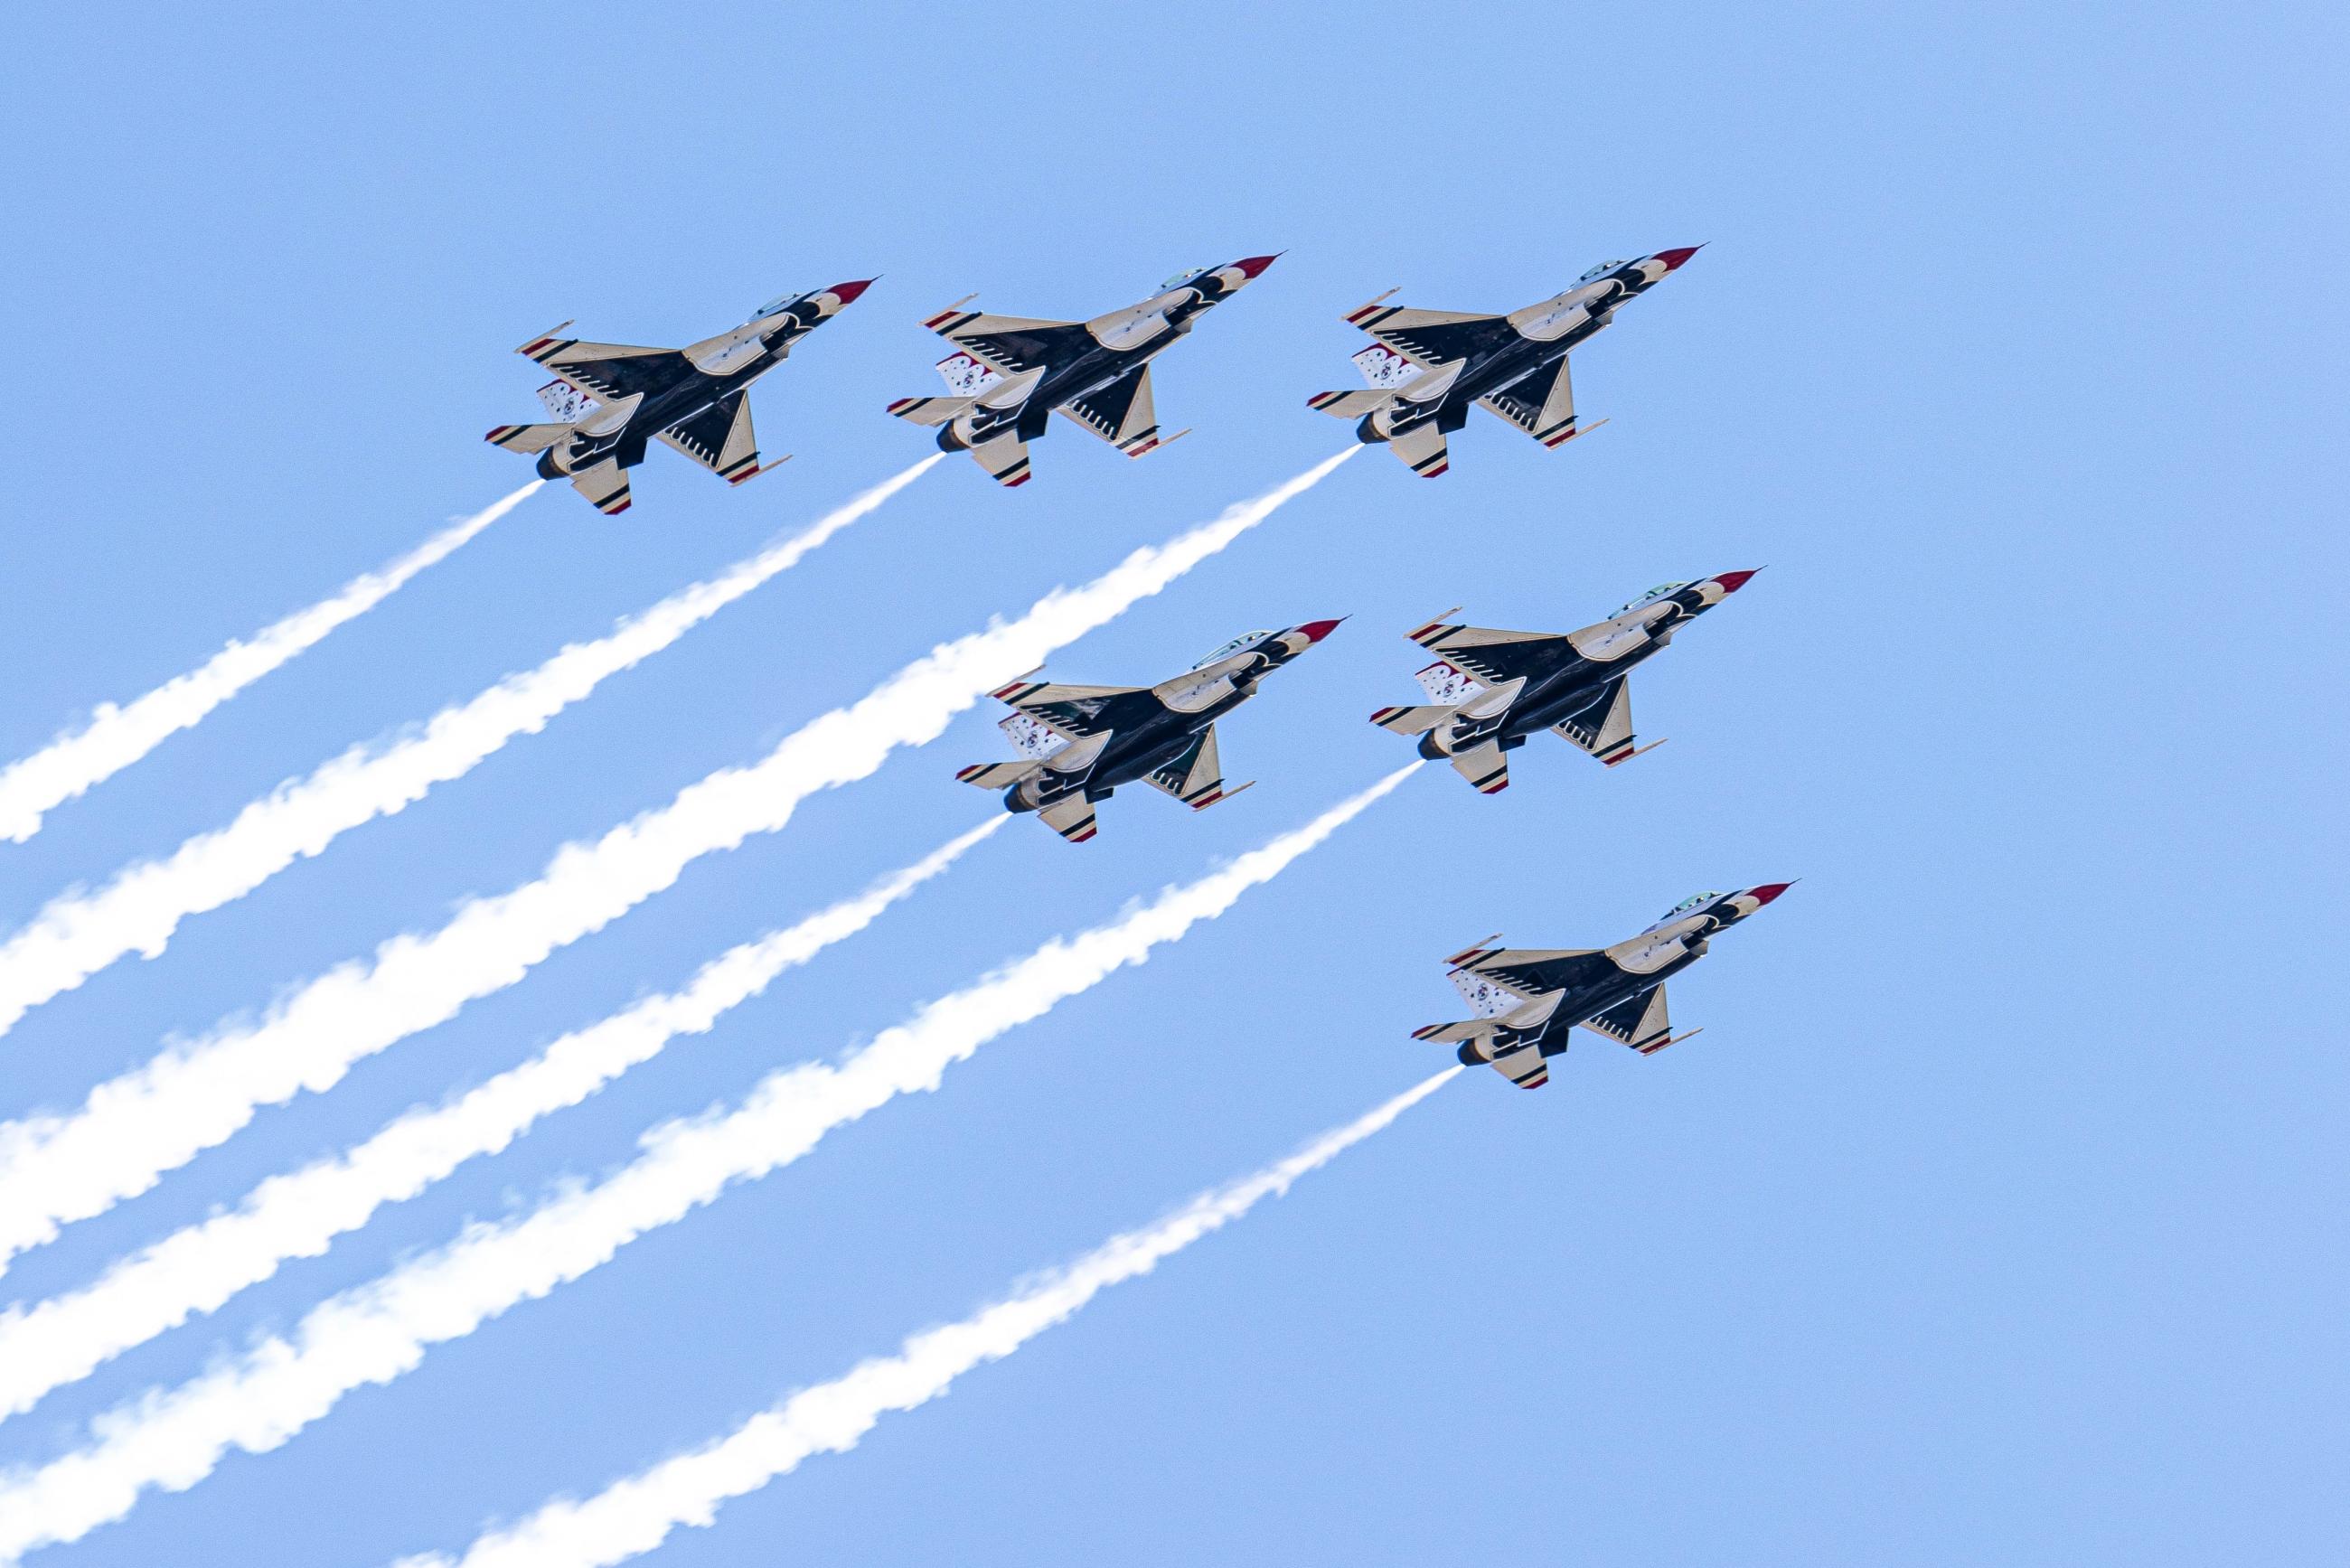 Six air force planes flying in sync